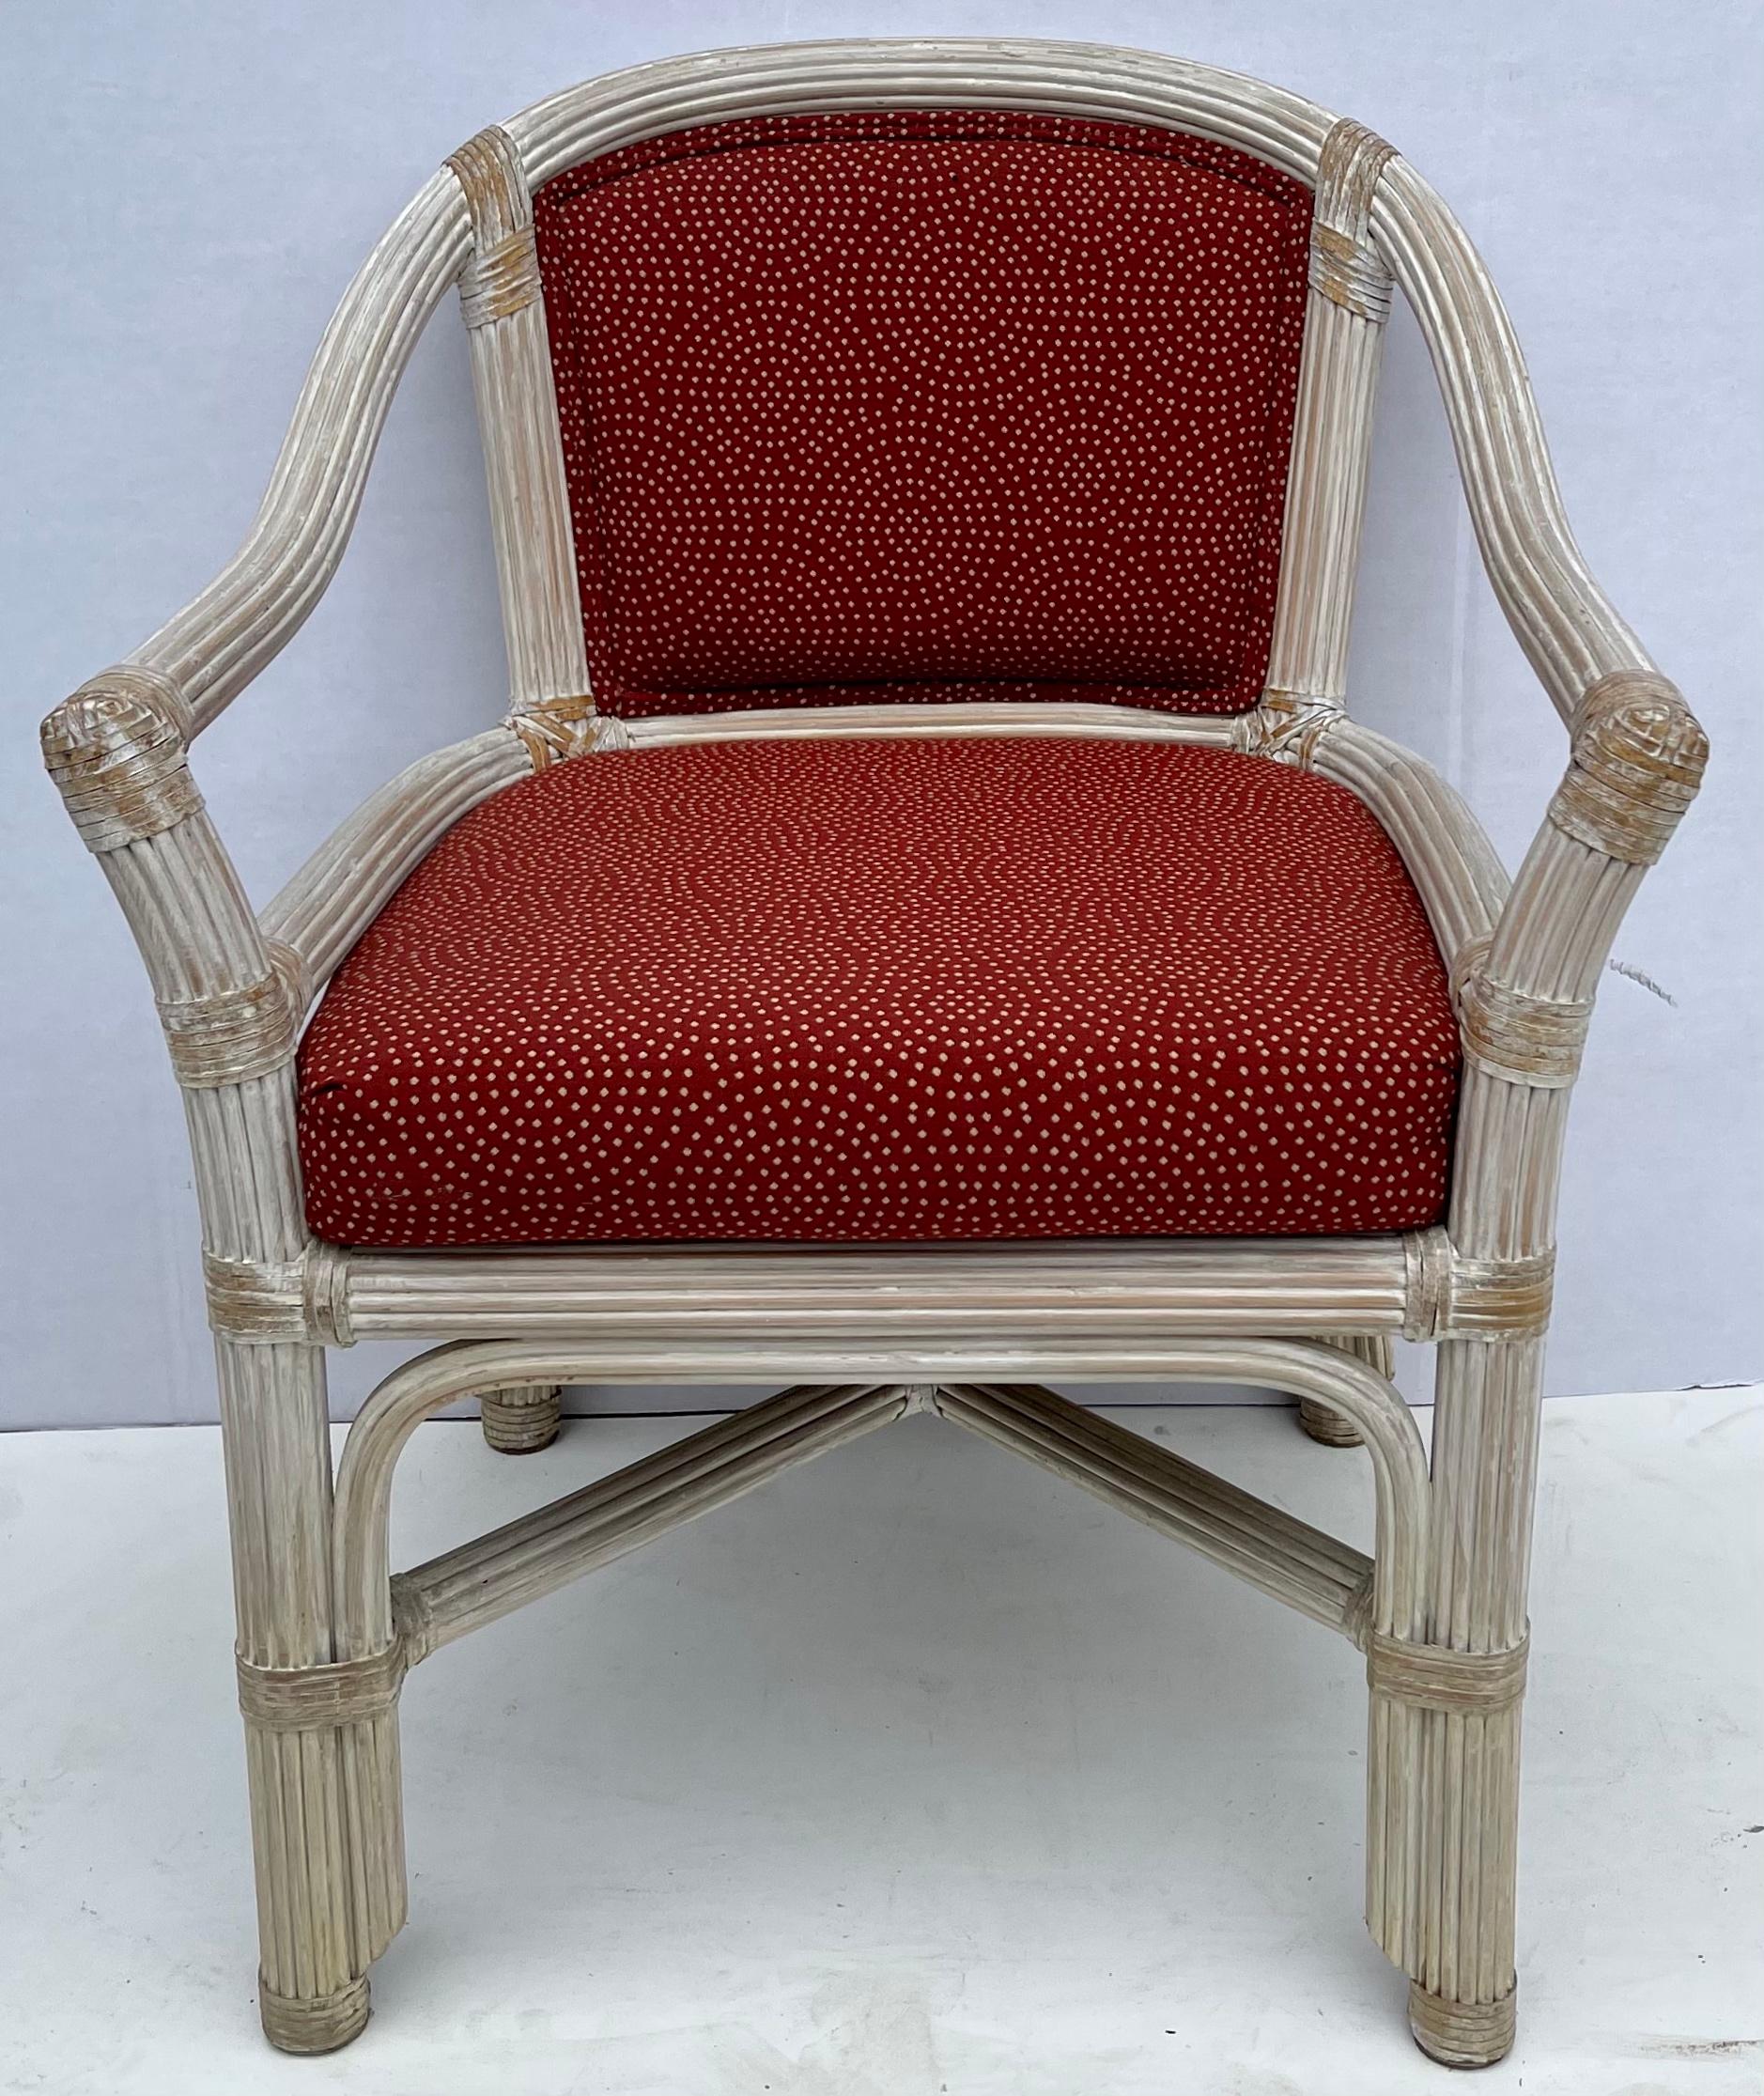 American 1970s Cerused Reeded Pencil Bamboo Chairs By Henry Link - S/4 For Sale